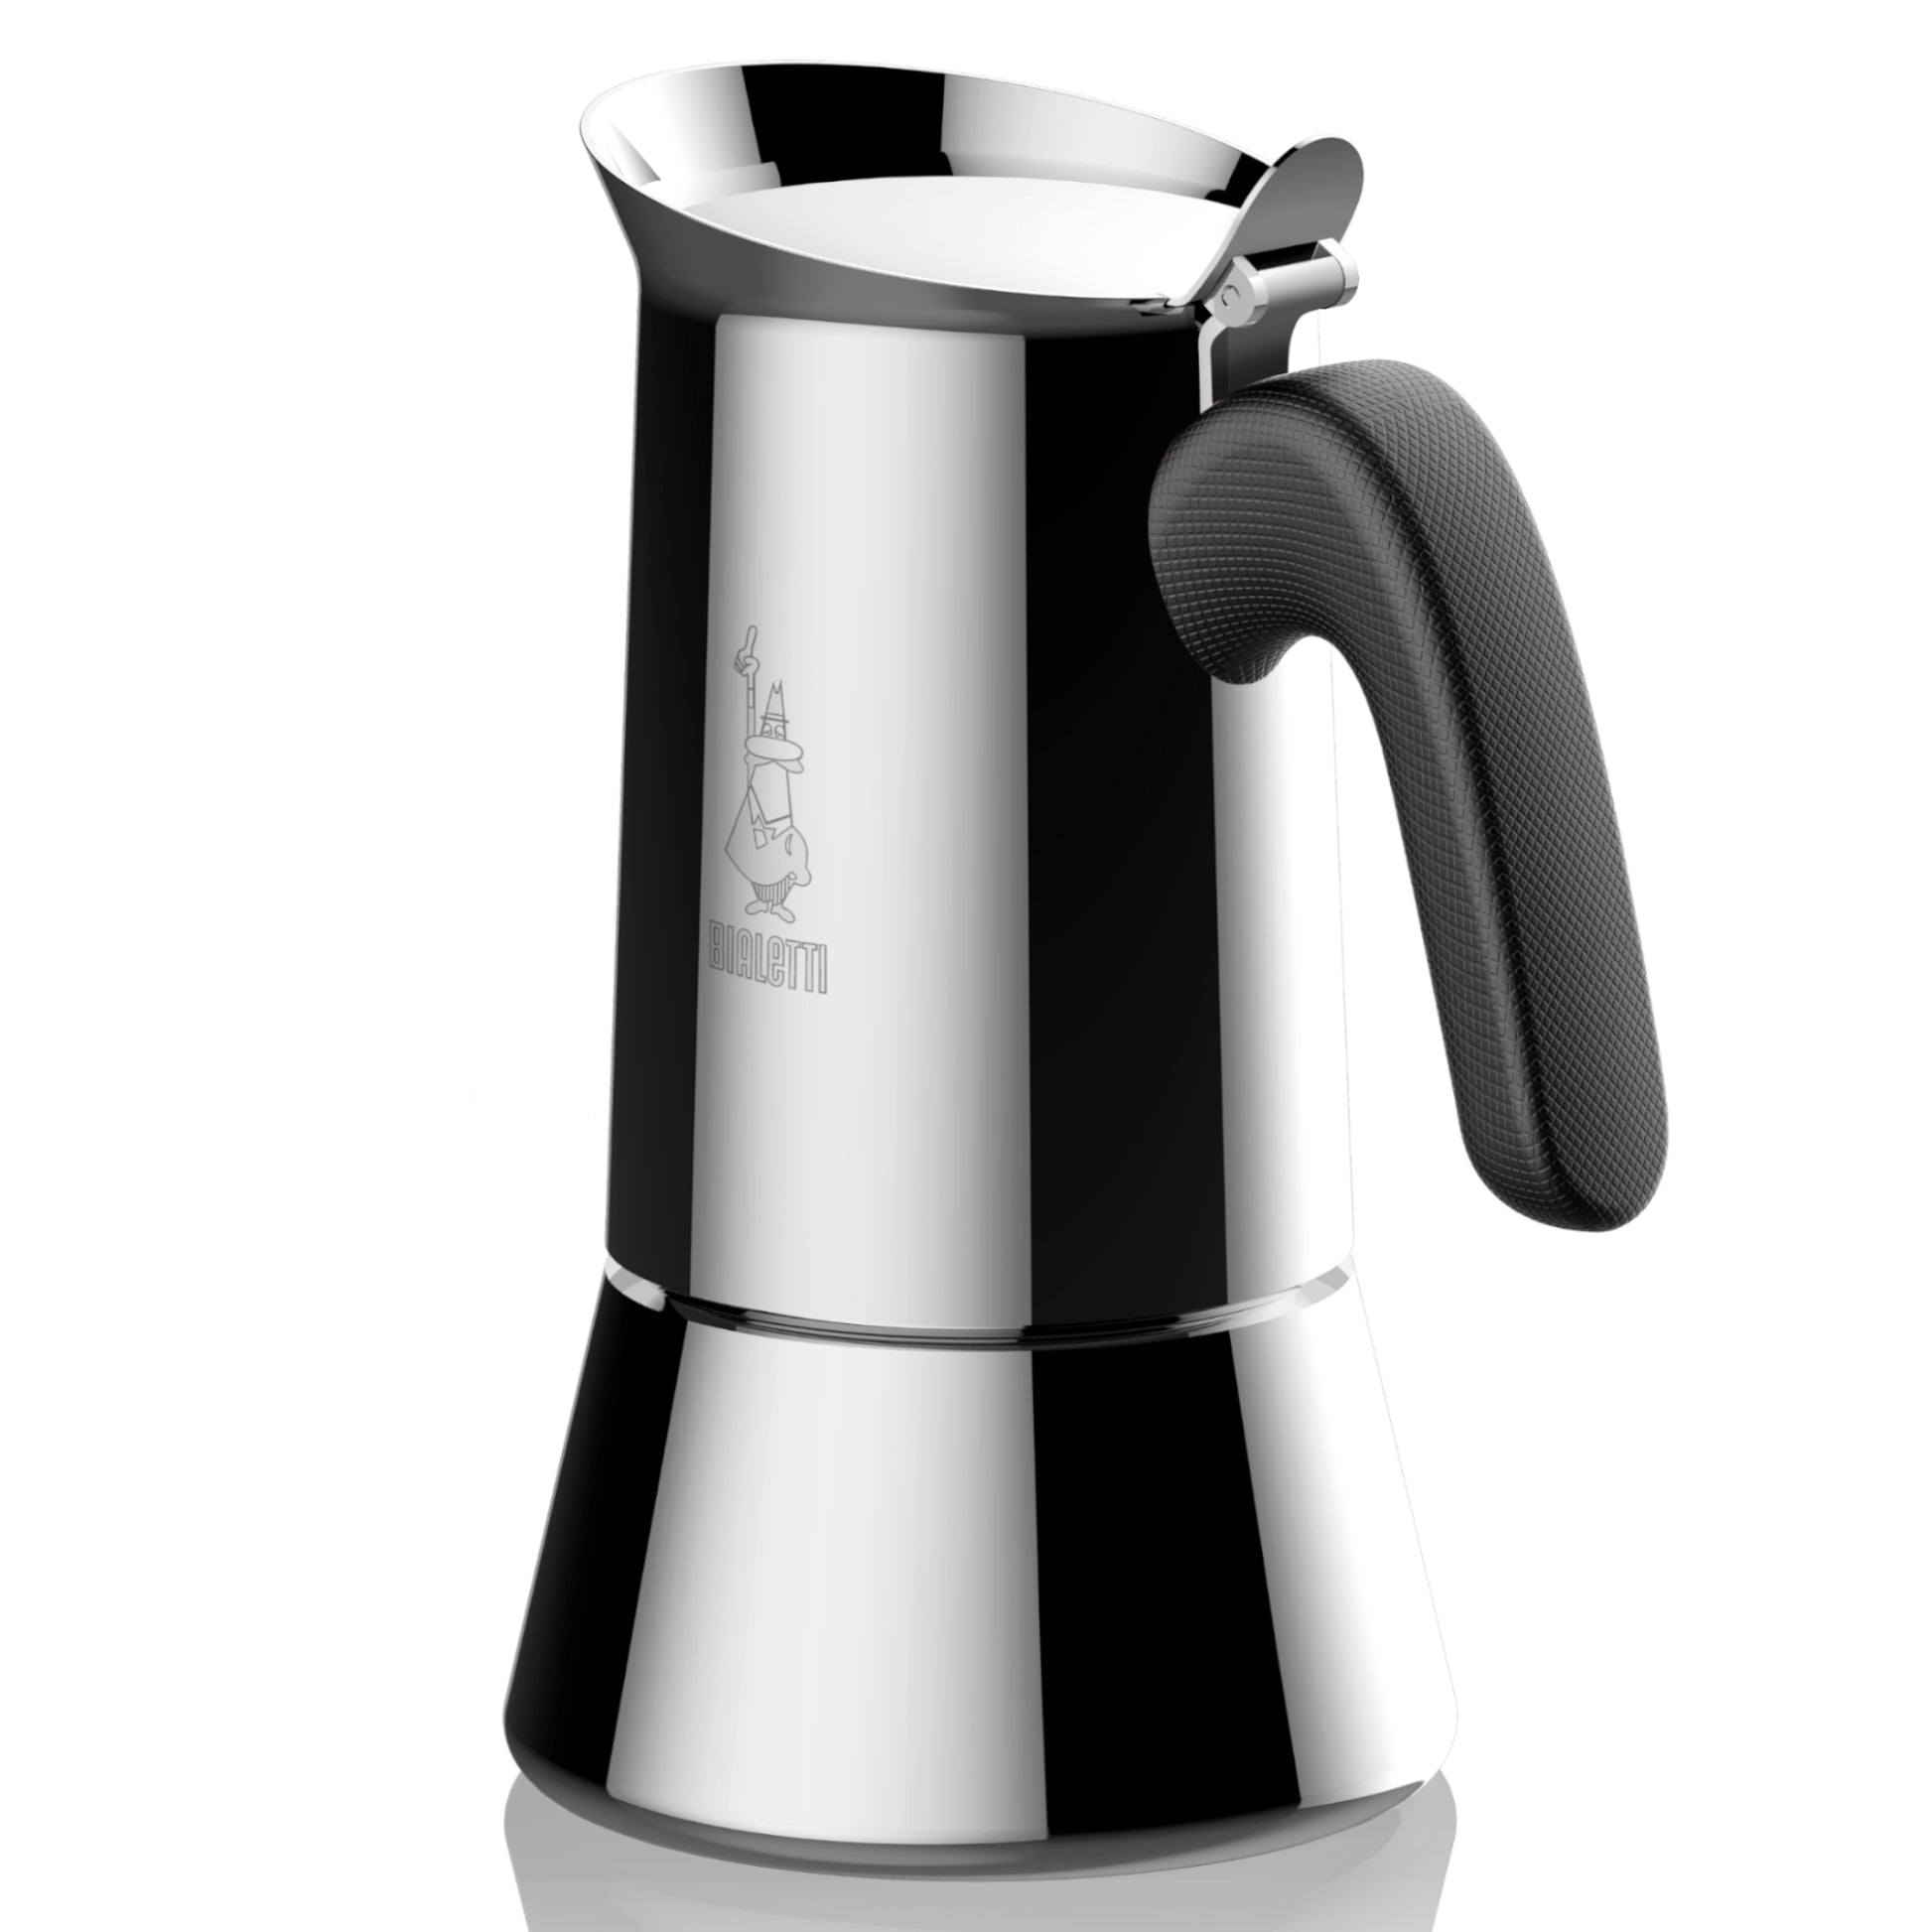 Bialetti Venus Stovetop Percolator 10-Cup Stainless Steel and Replacement  filter & Gaskets